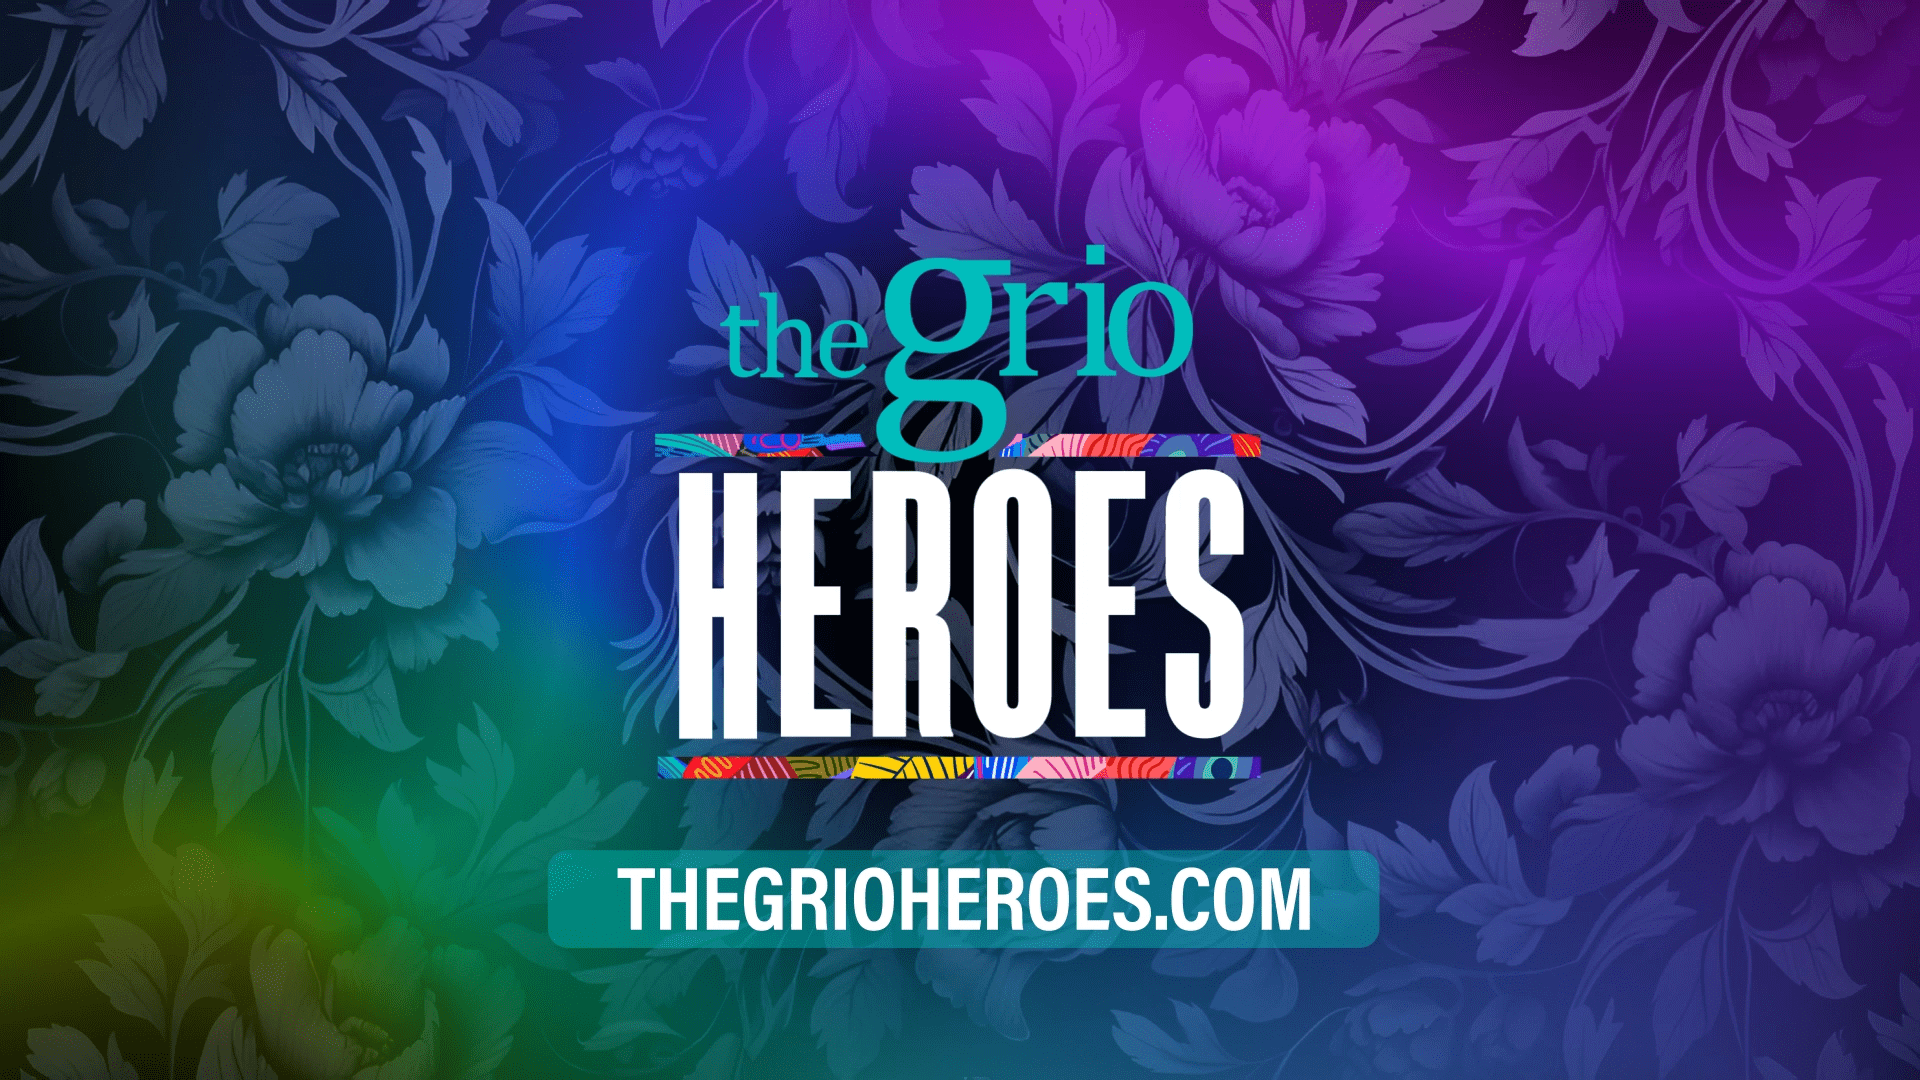 CALL FOR NOMINATIONS BYRON ALLEN’S THE GRIO LAUNCHES 2ND ANNUAL